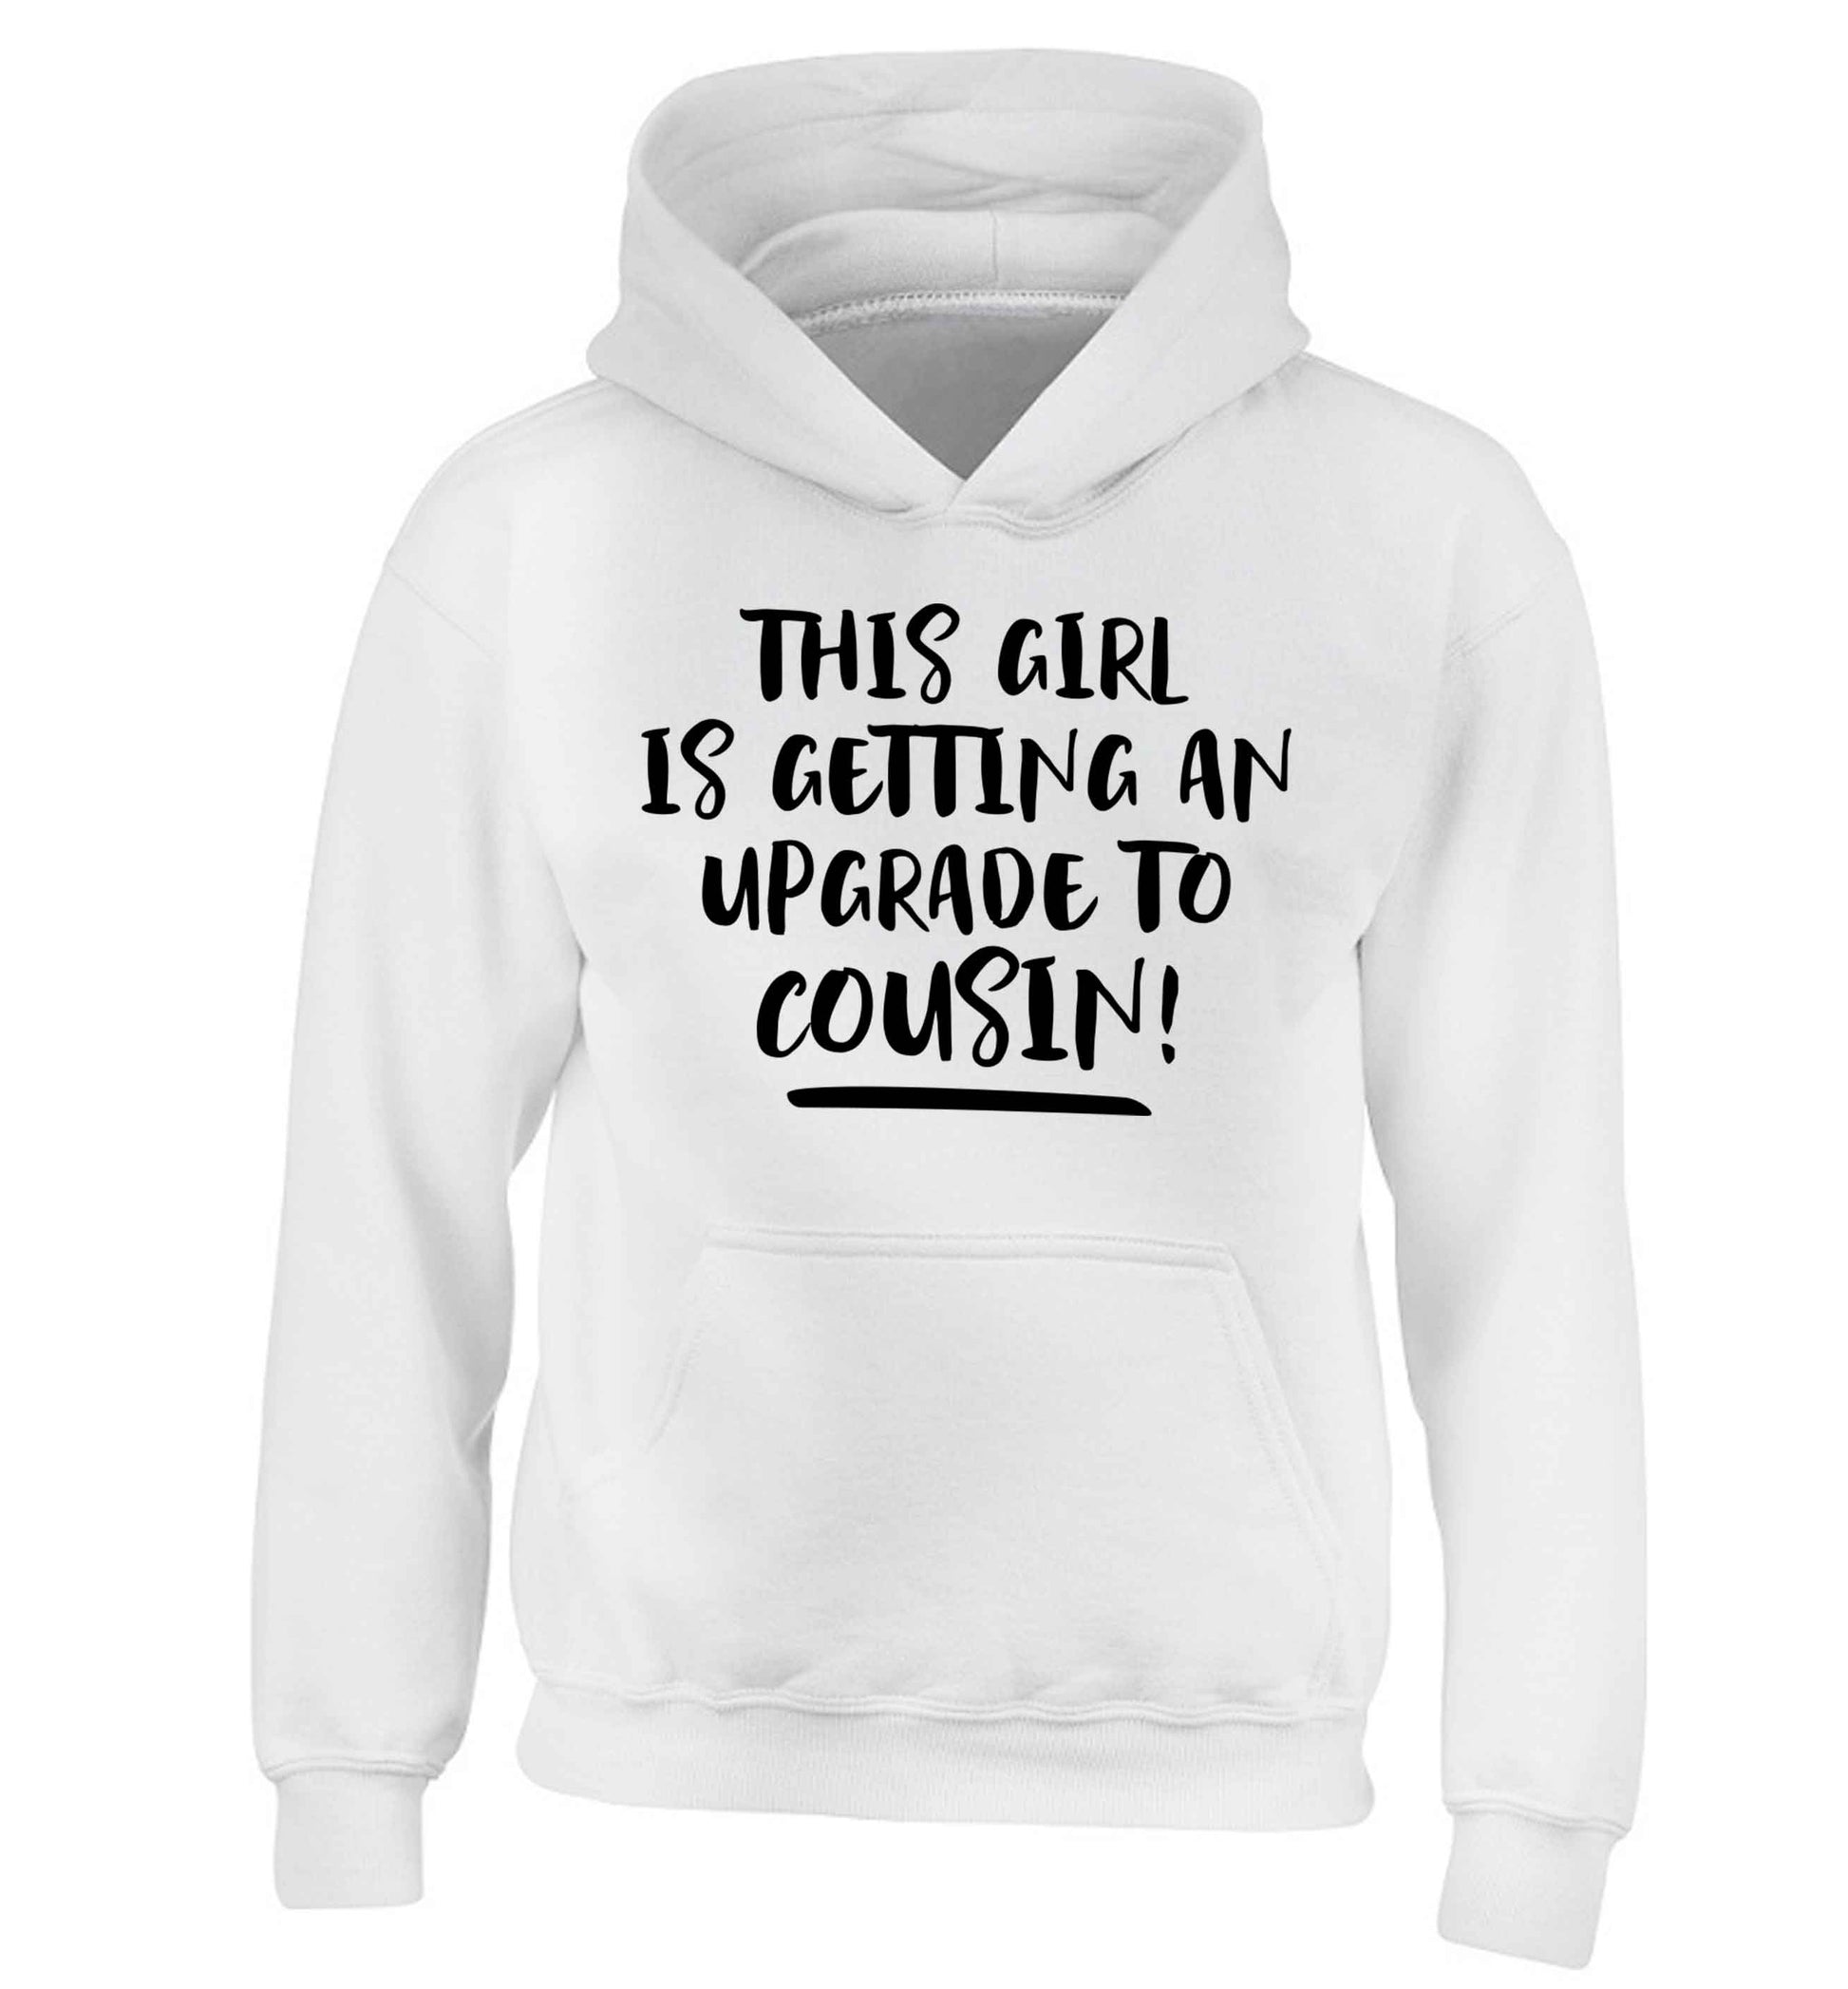 This girl is getting an upgrade to cousin! children's white hoodie 12-13 Years